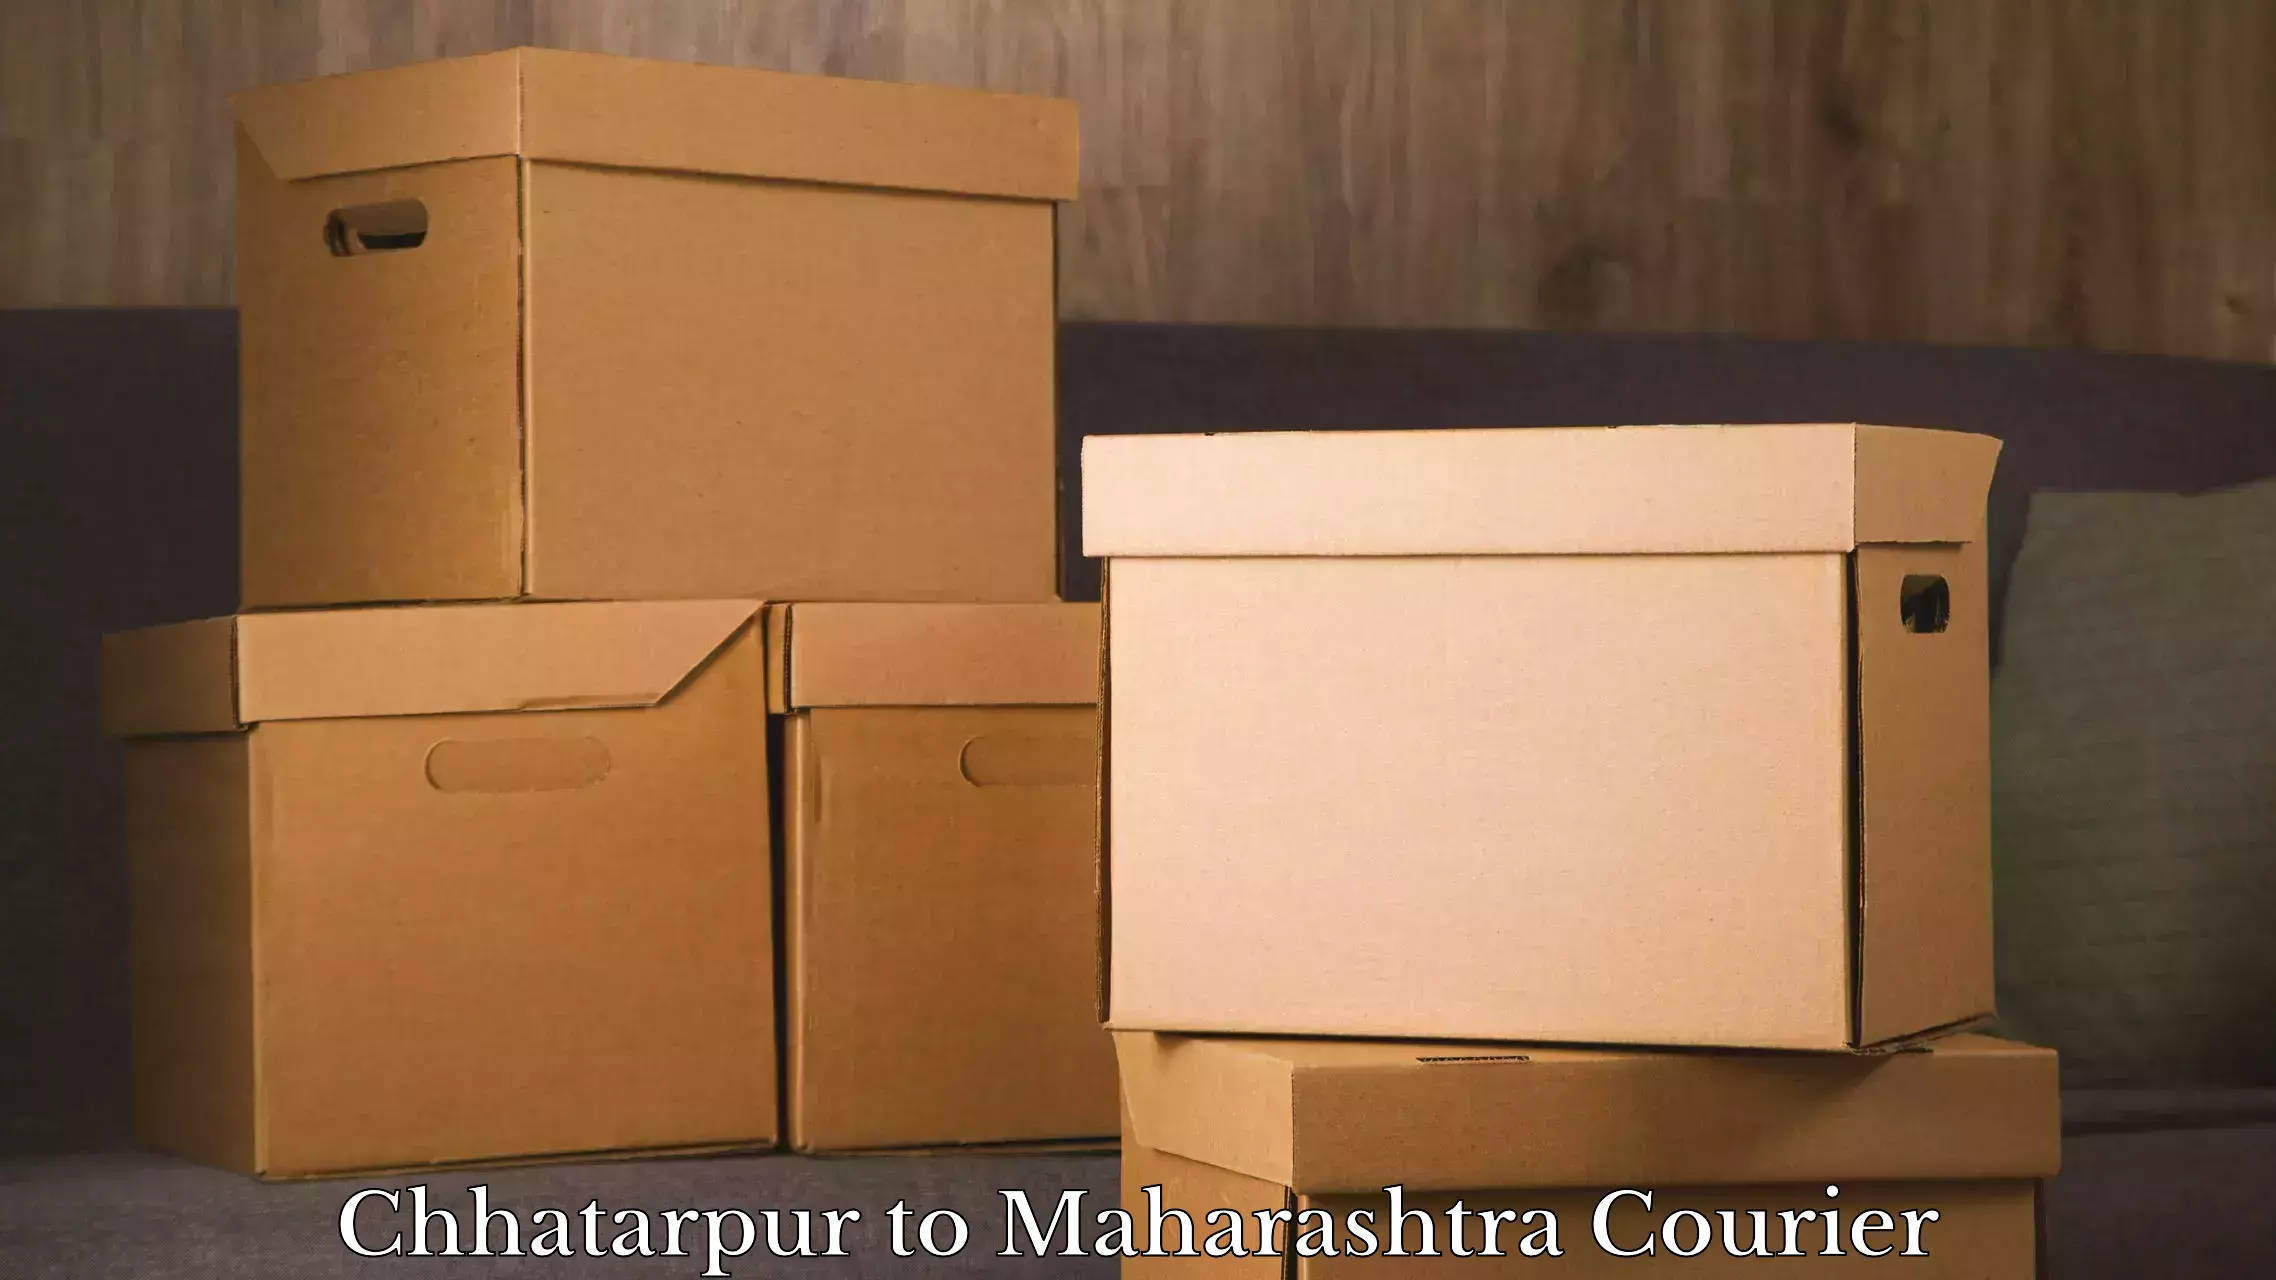 Luggage delivery app Chhatarpur to Thane